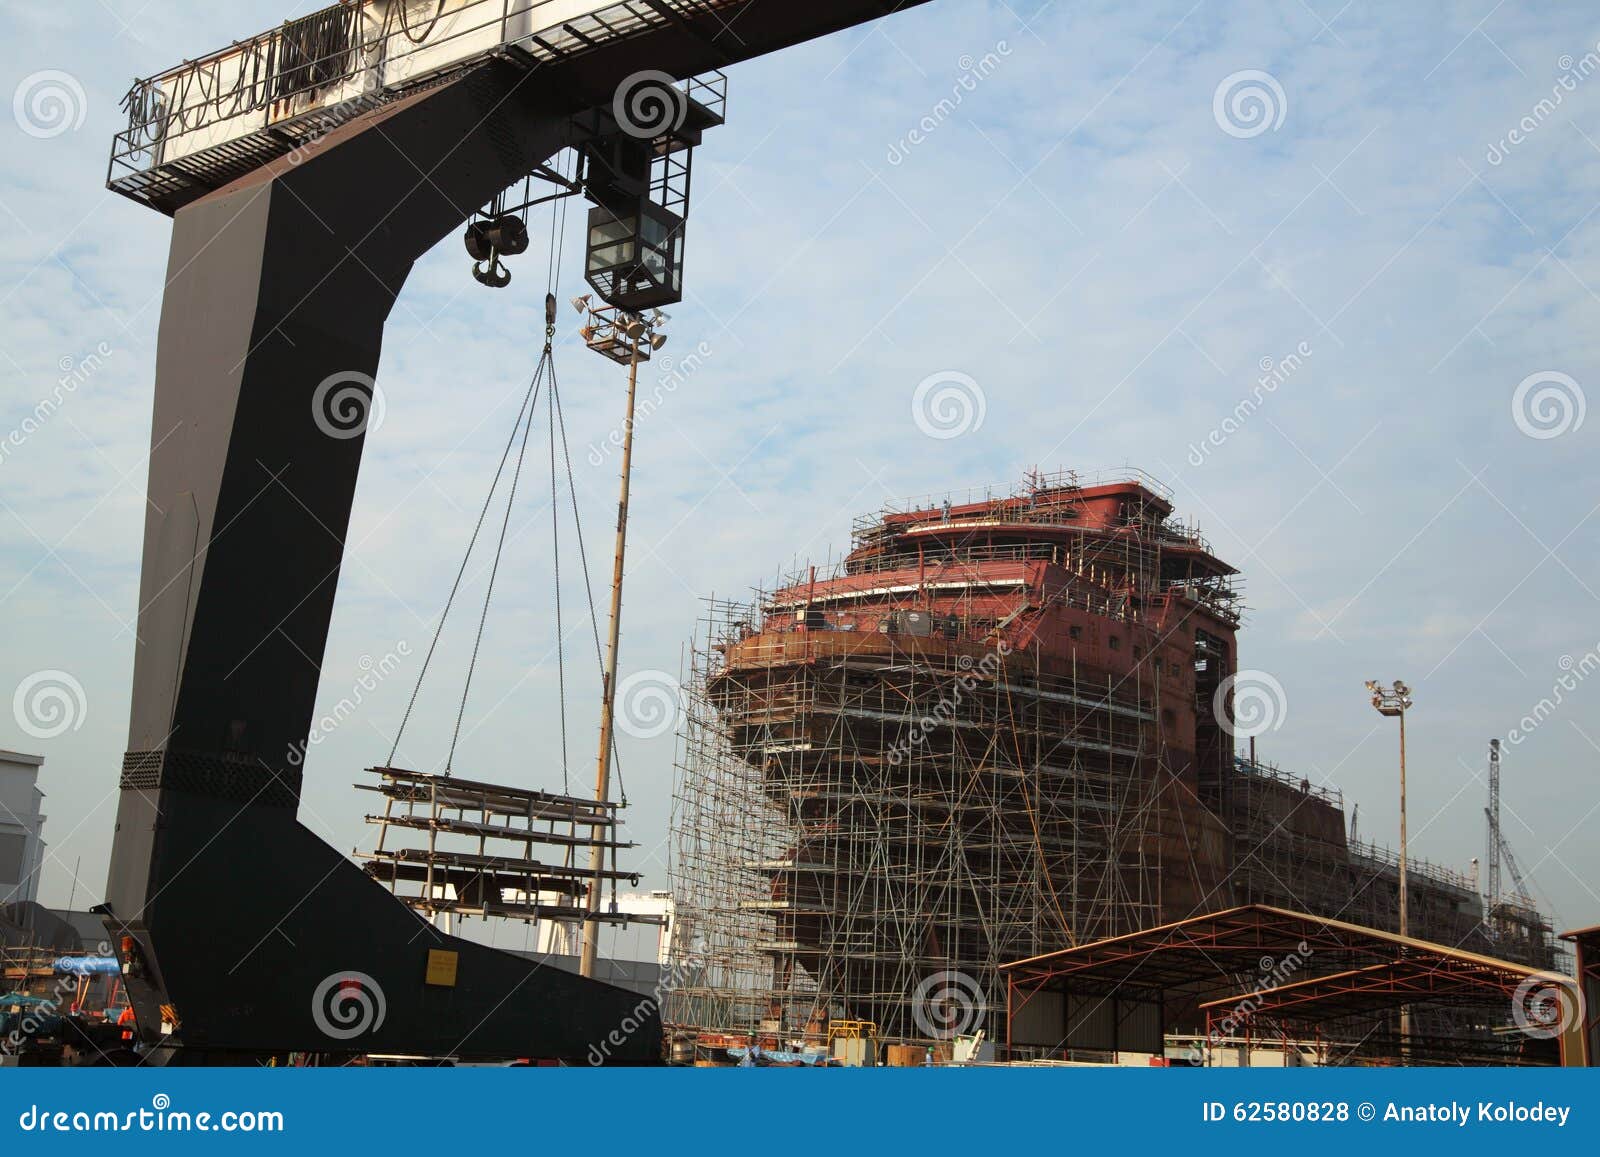 view of shipyard with straddle crane and ship under construction